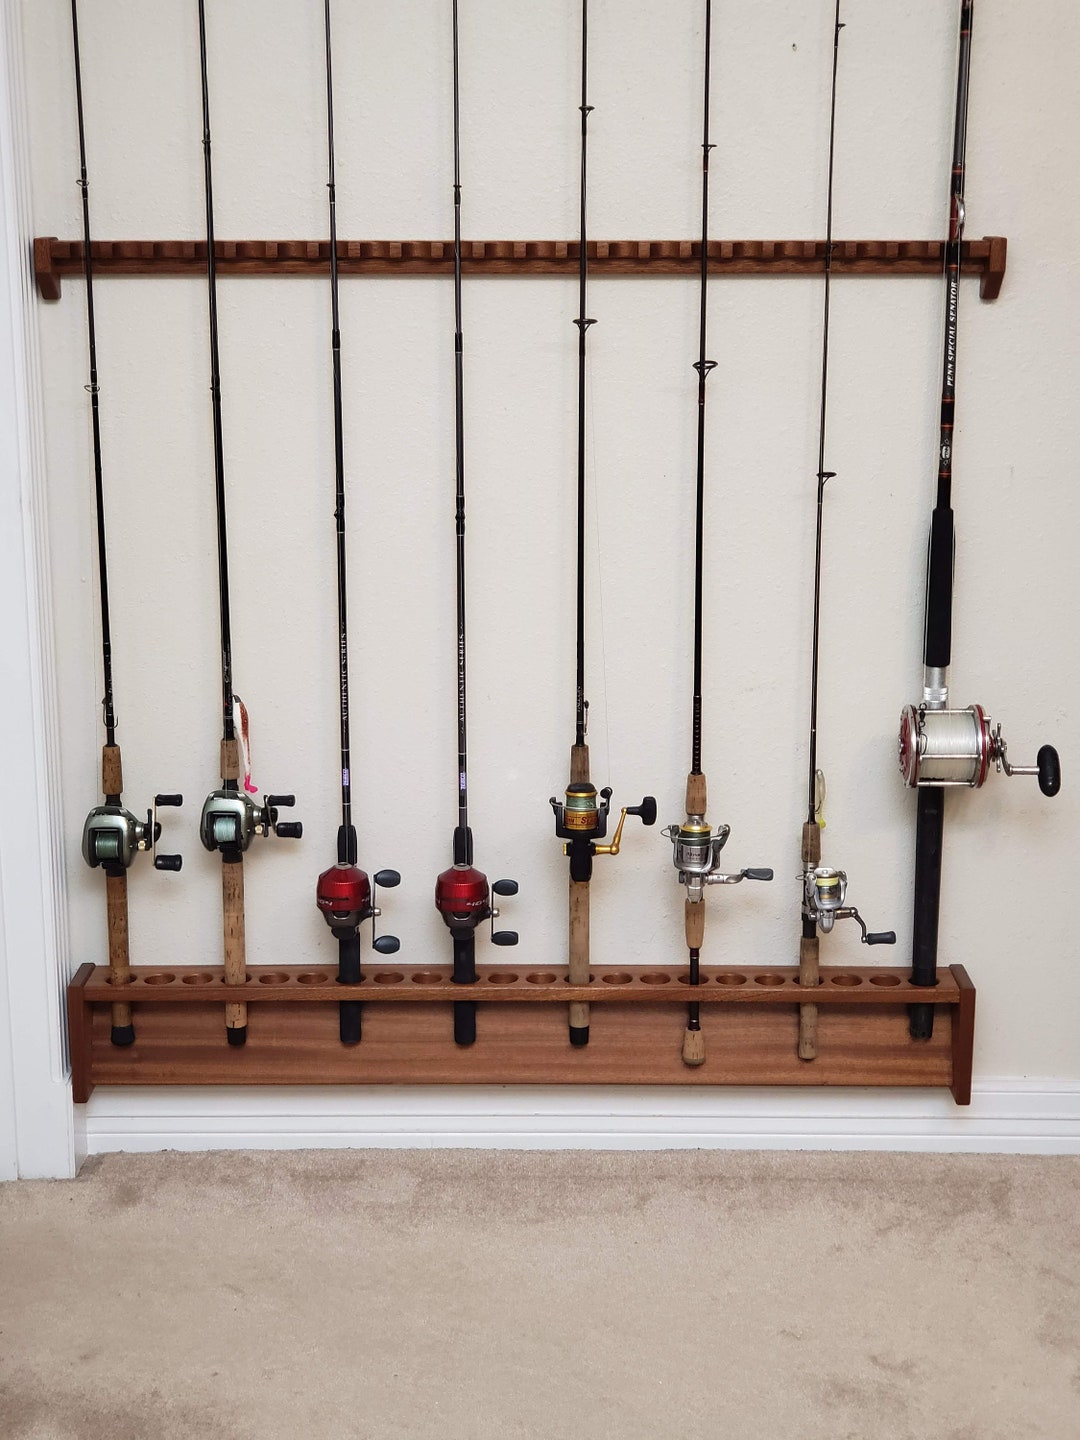 Fishing Rod Rack by Grahamry -- Homemade fishing rod rack constructed from  2-, 6-, and 8-inch wide lumb…